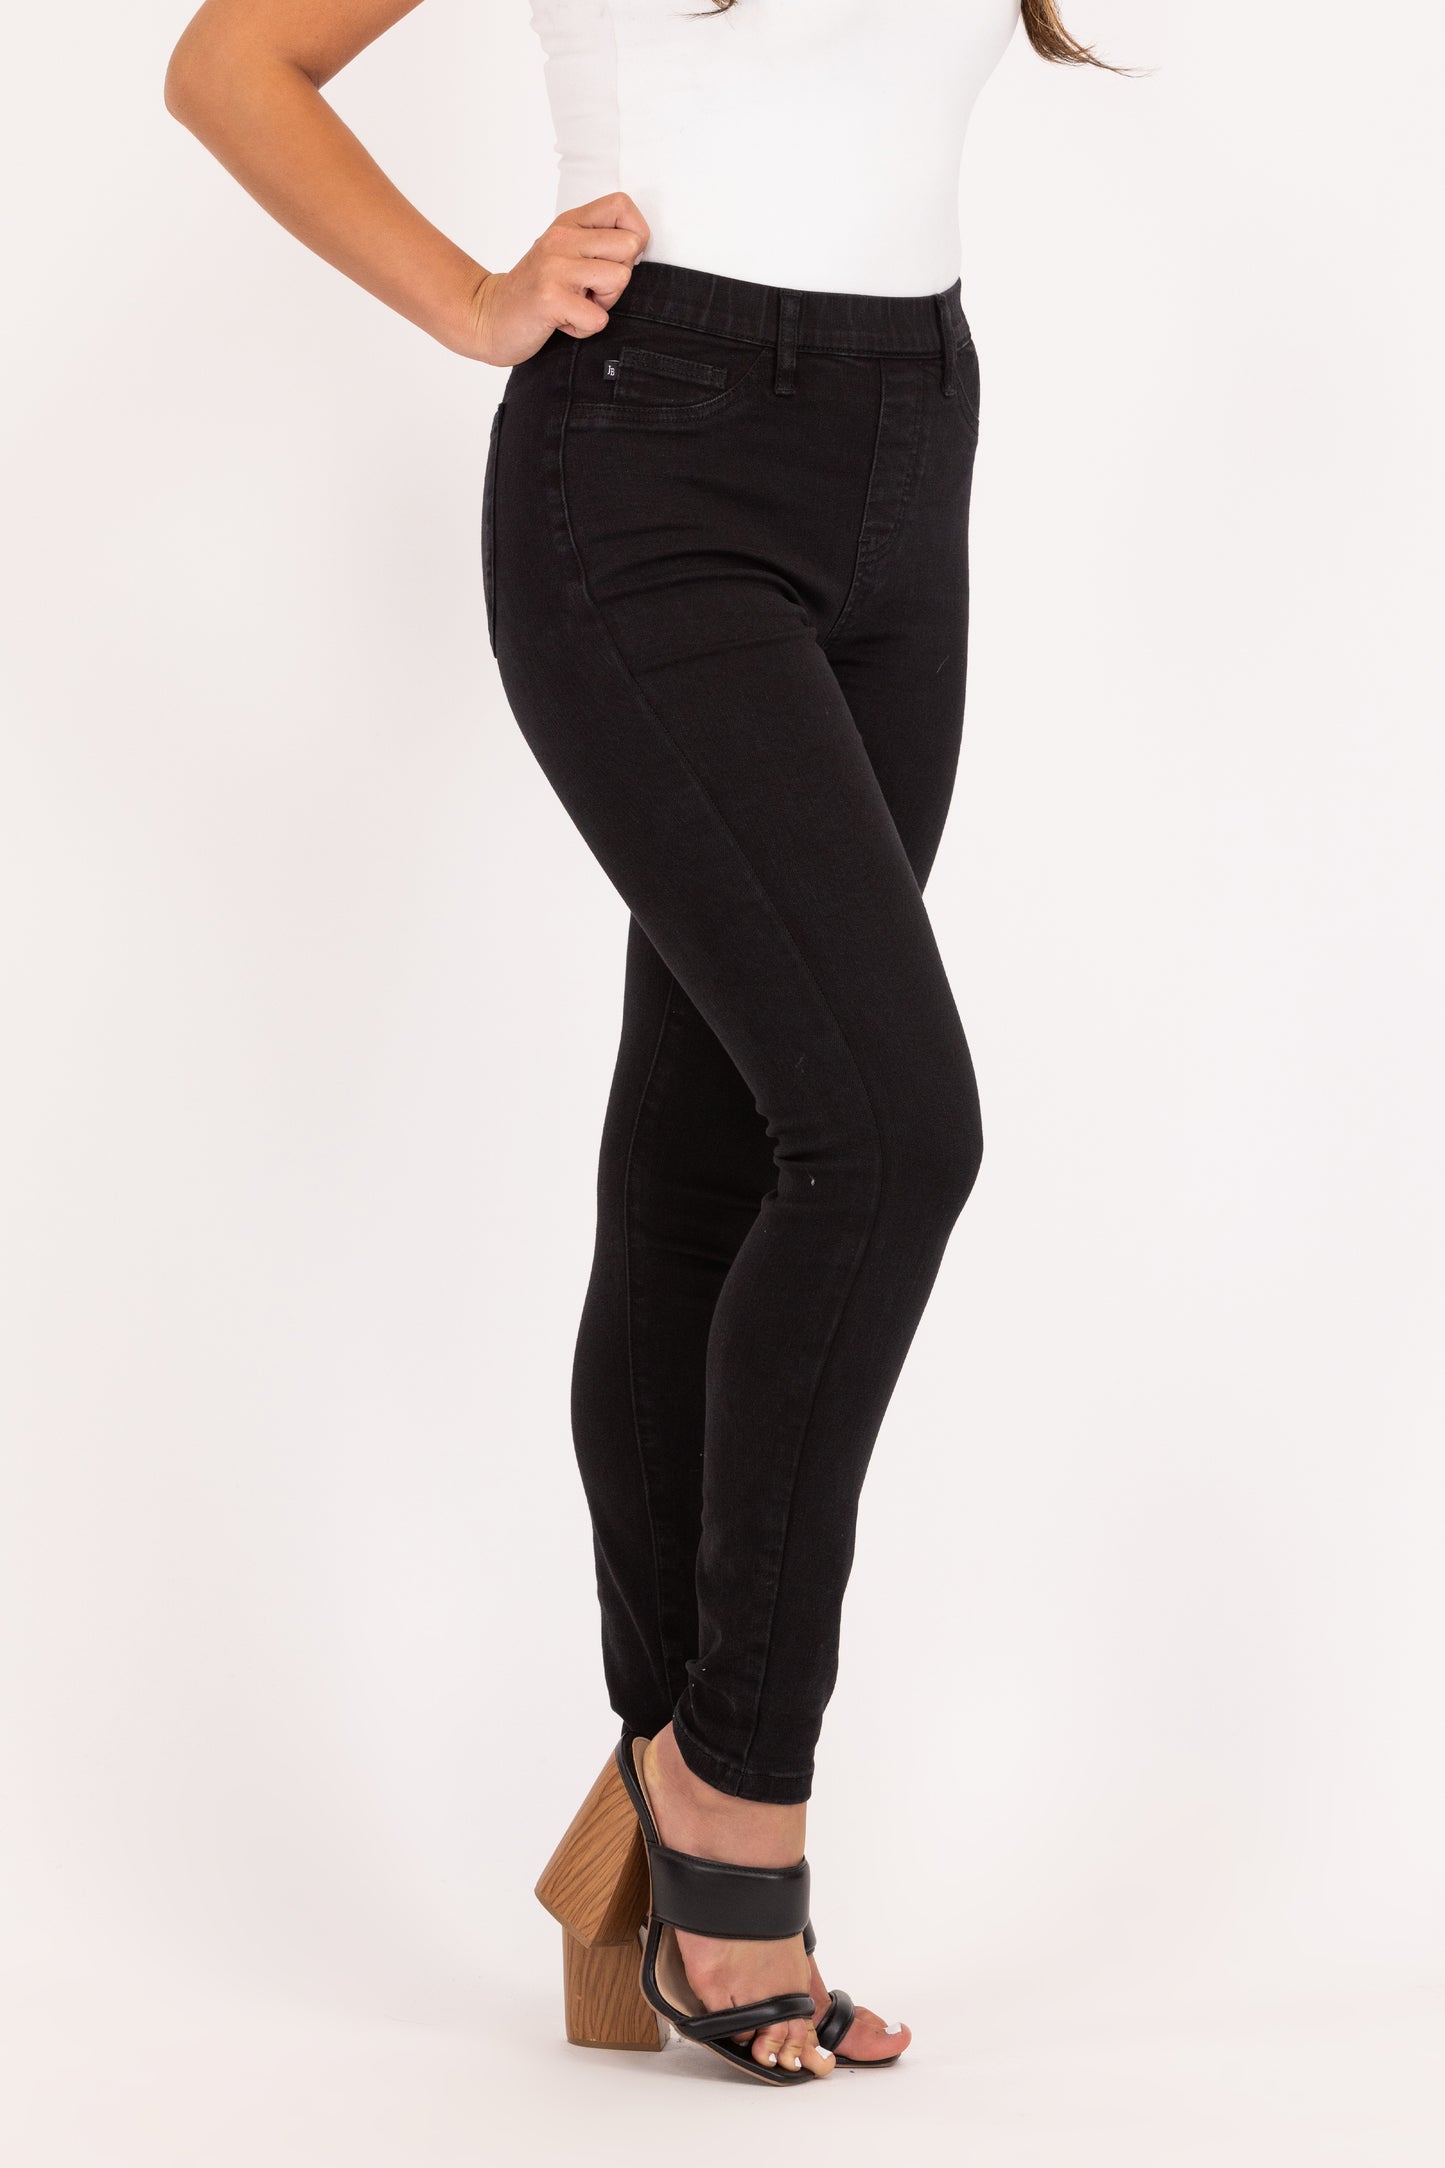 Ask Me To Dance from Judy Blue: High-Rise Pull On Skinny Denim